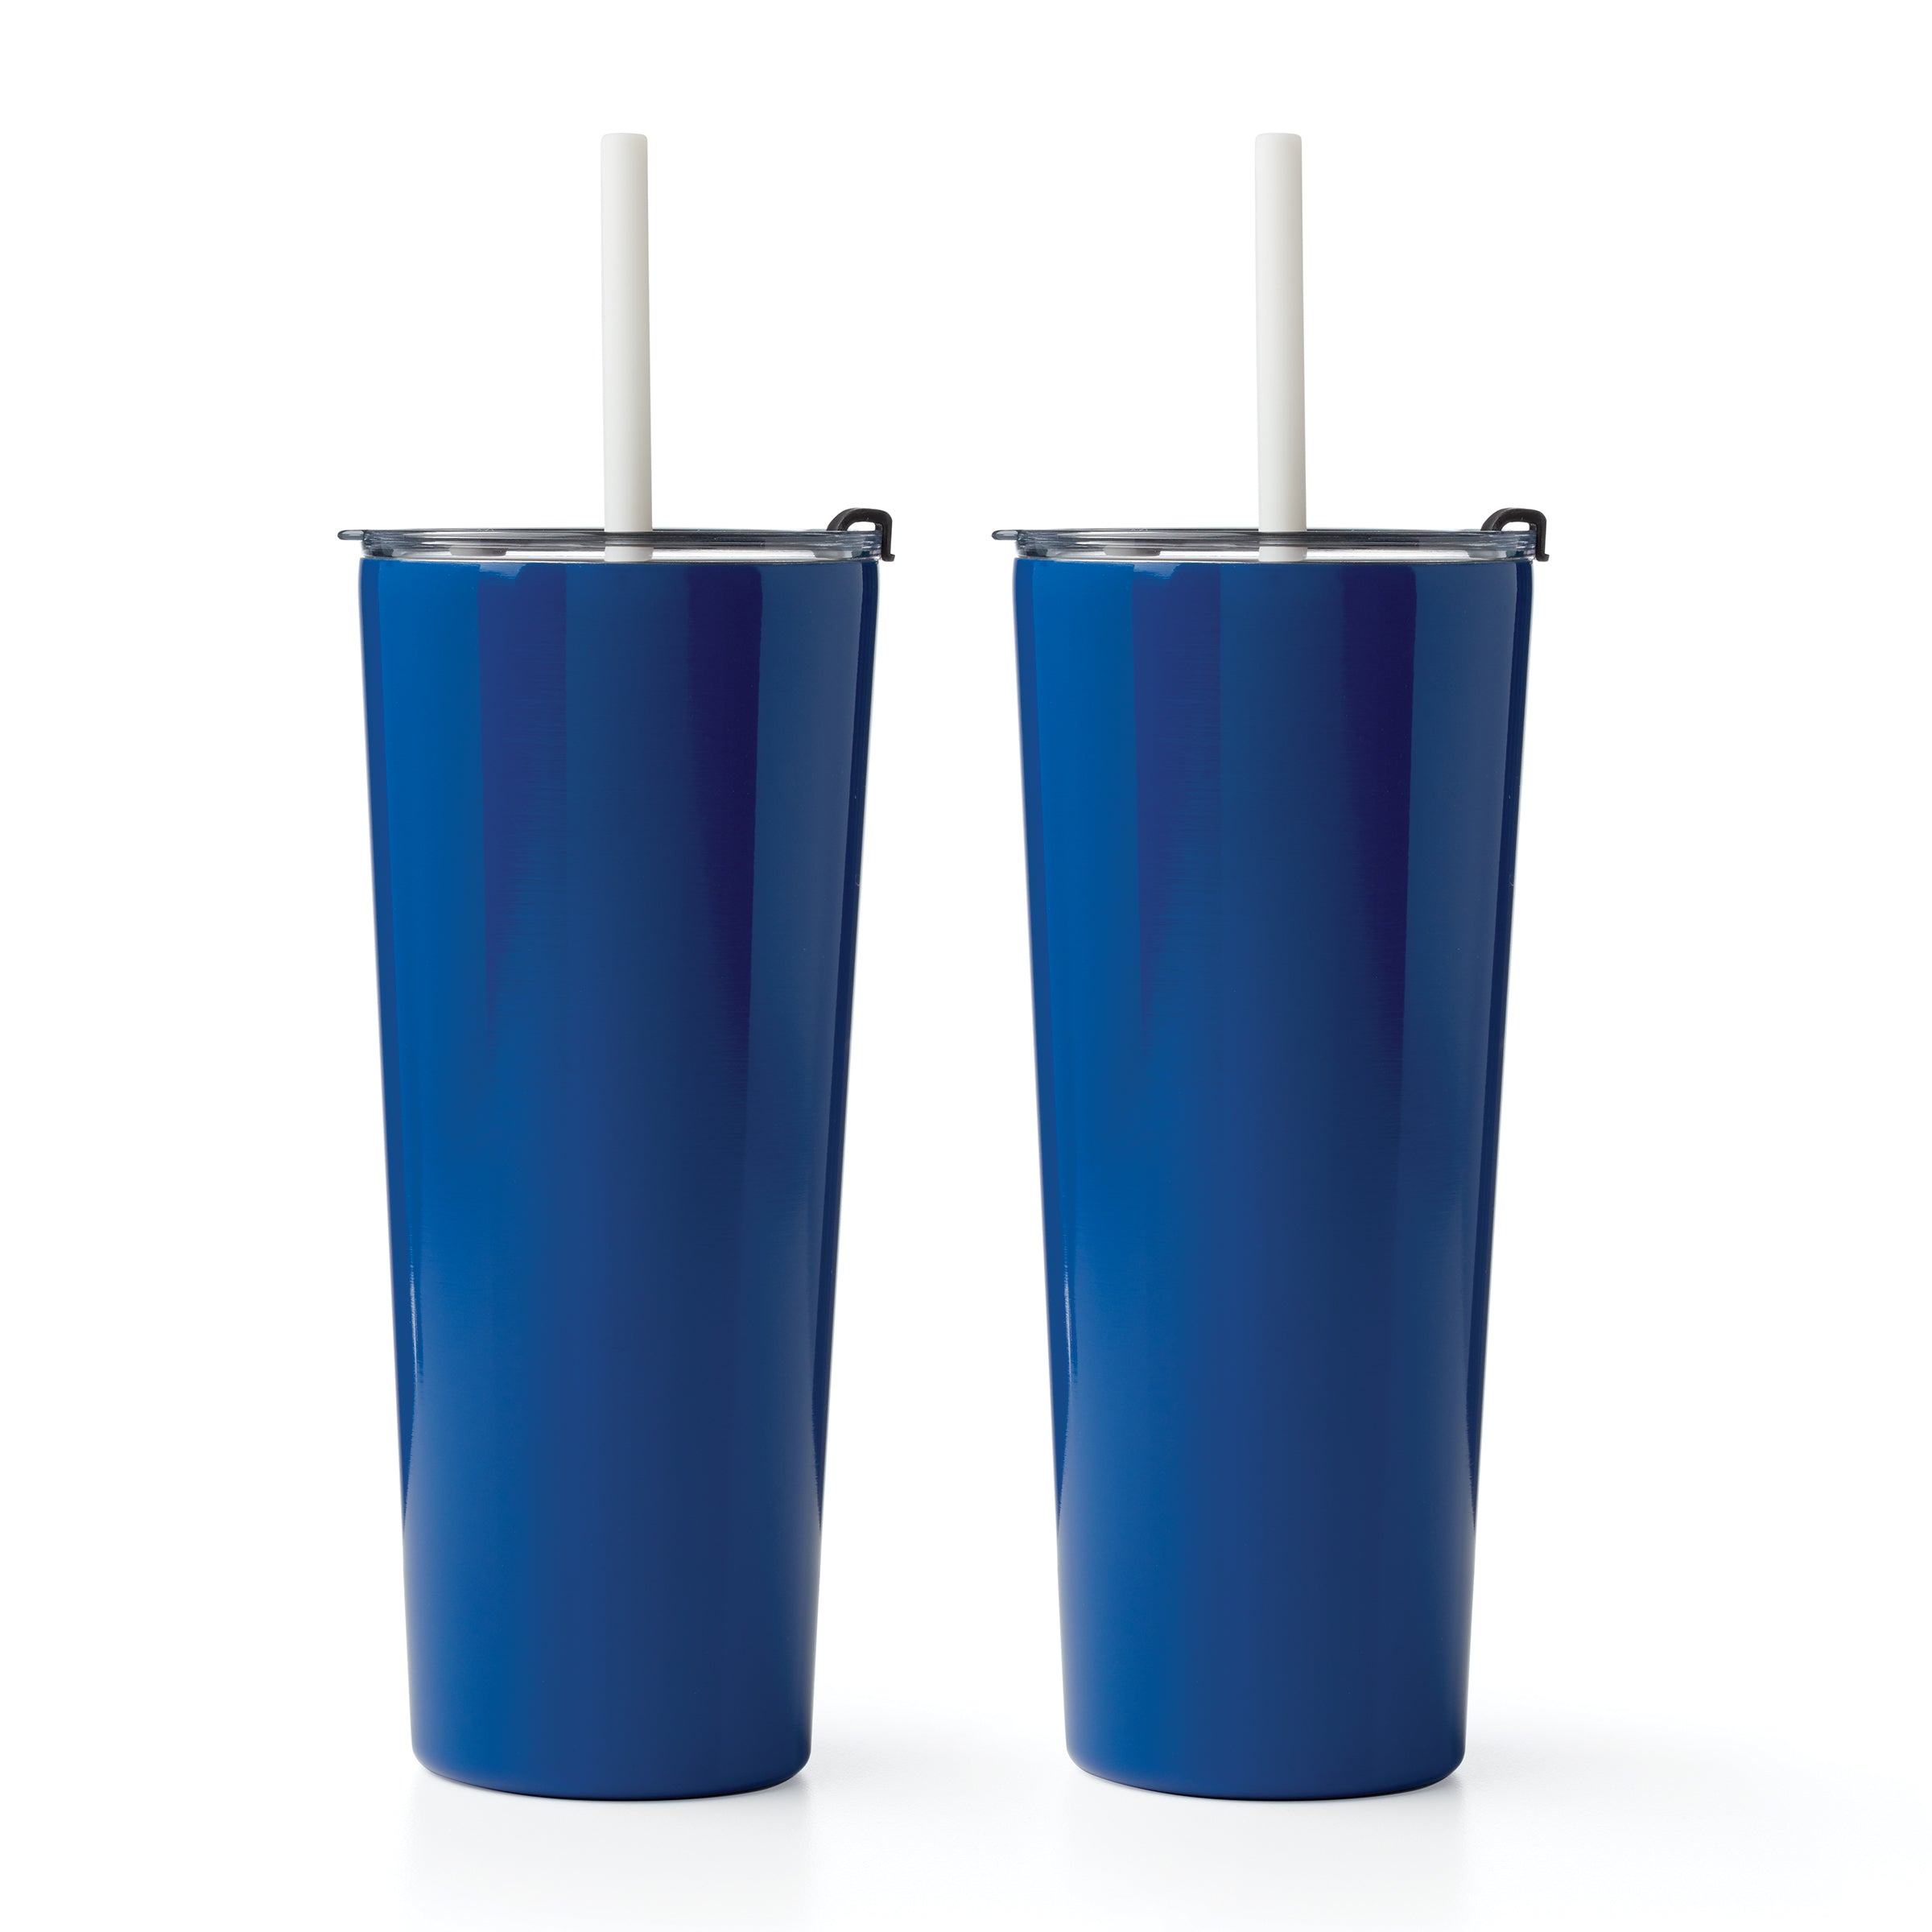 24 oz Tumbler - Reduce Cold1 Collection Mineral Blue